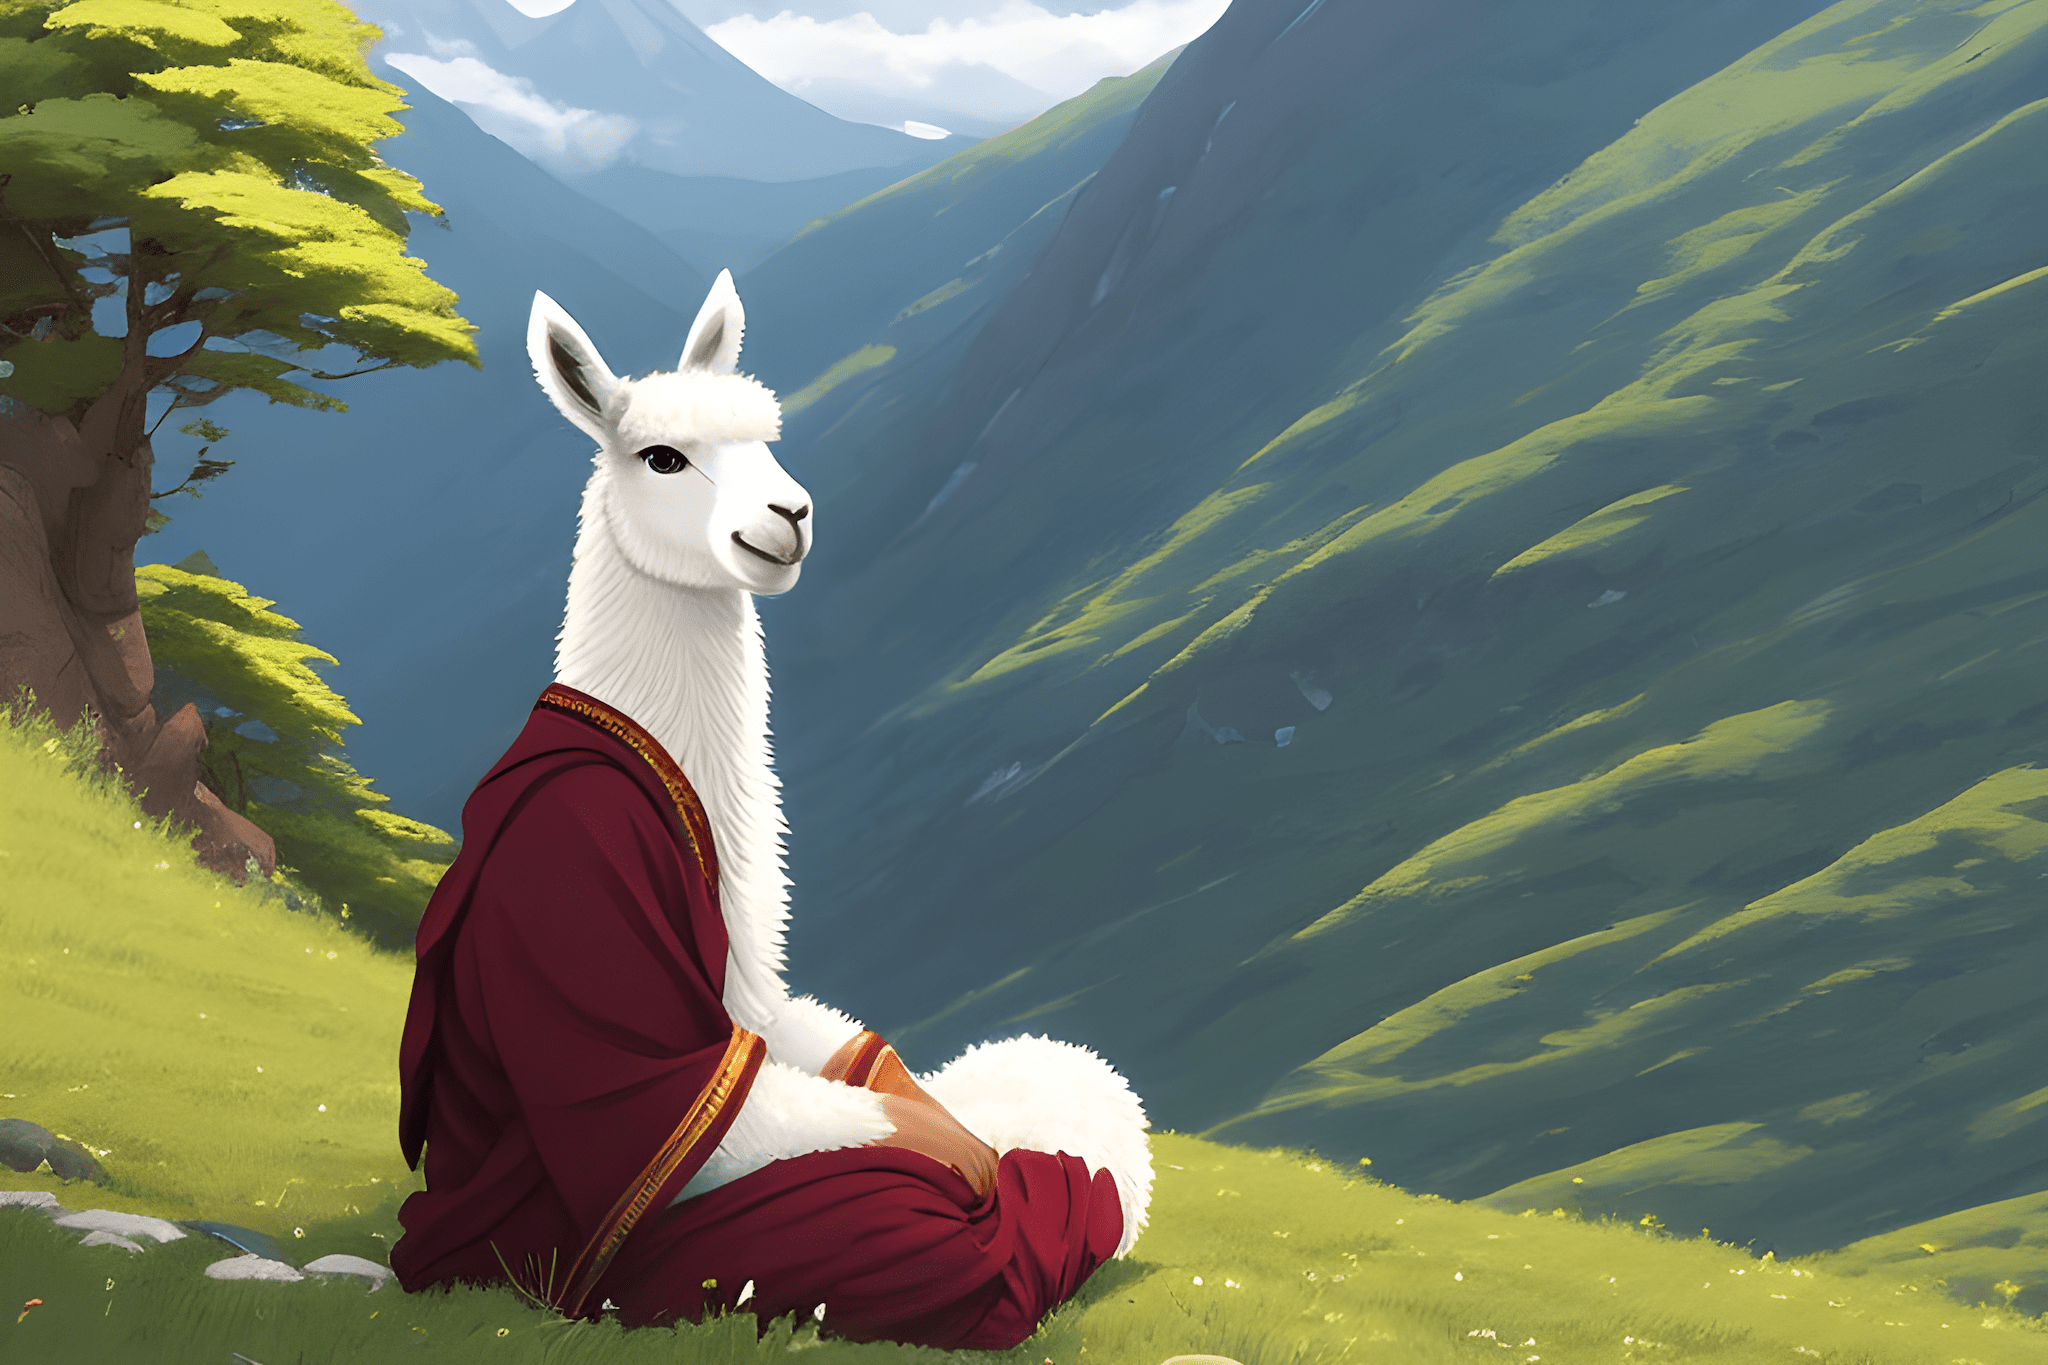 Picture of a anthropomorphic lama sitting in cross legged pose with mountains and forest in background